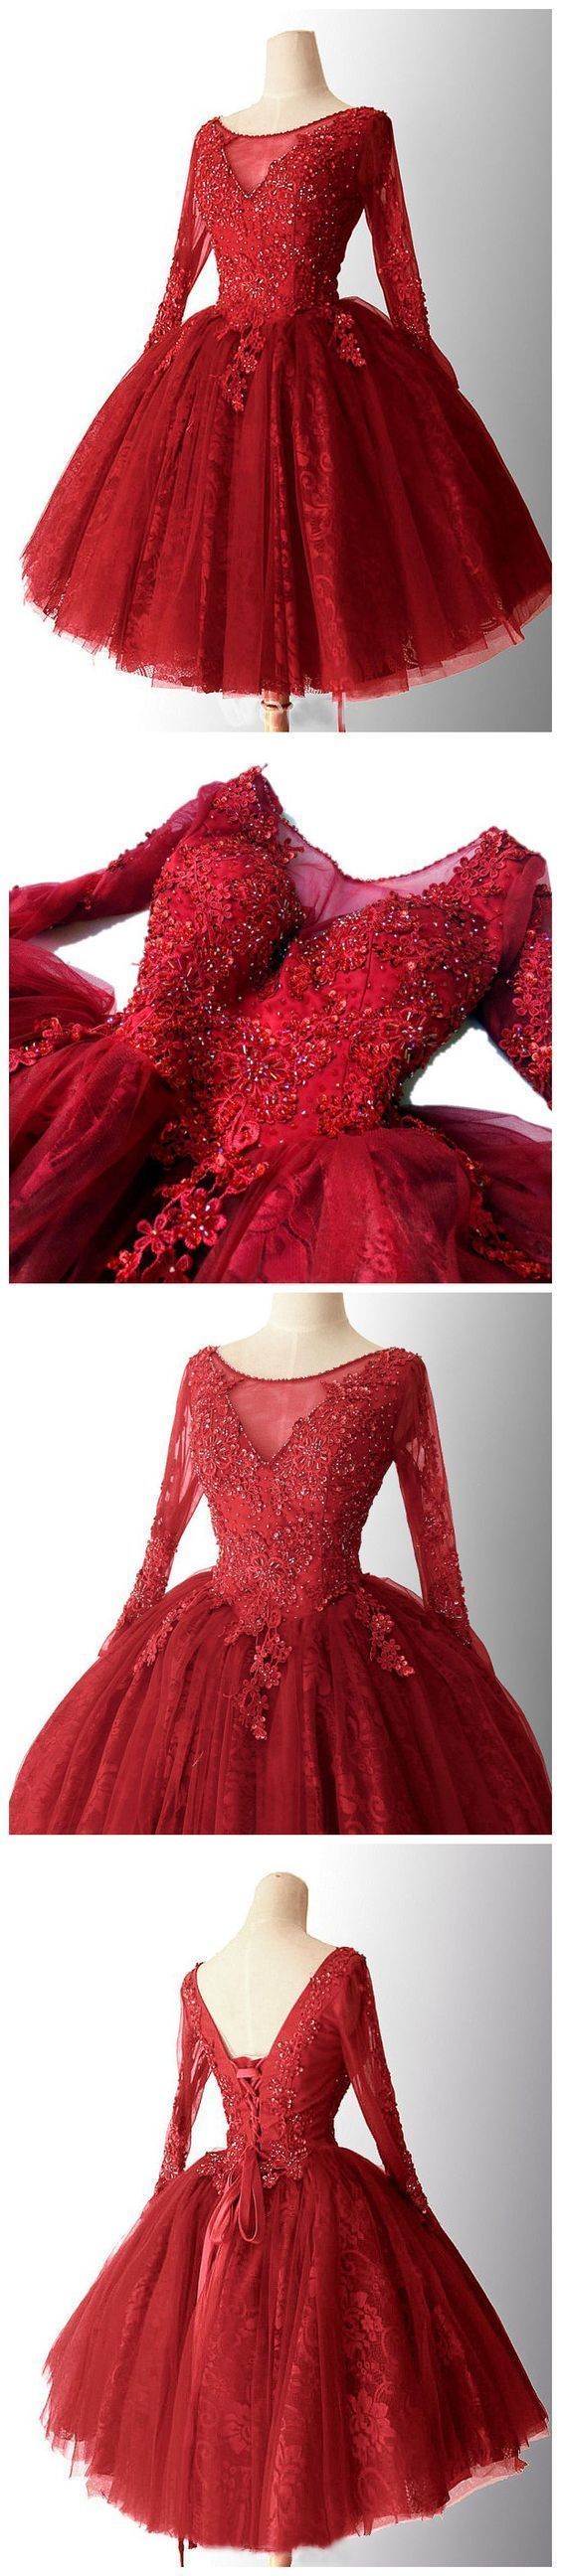 Red Tulle Lace Short Homecoming Dresses With Long Sleeve Beaded Girls Party Gowns Custom Made Mini Prom Party Gowns